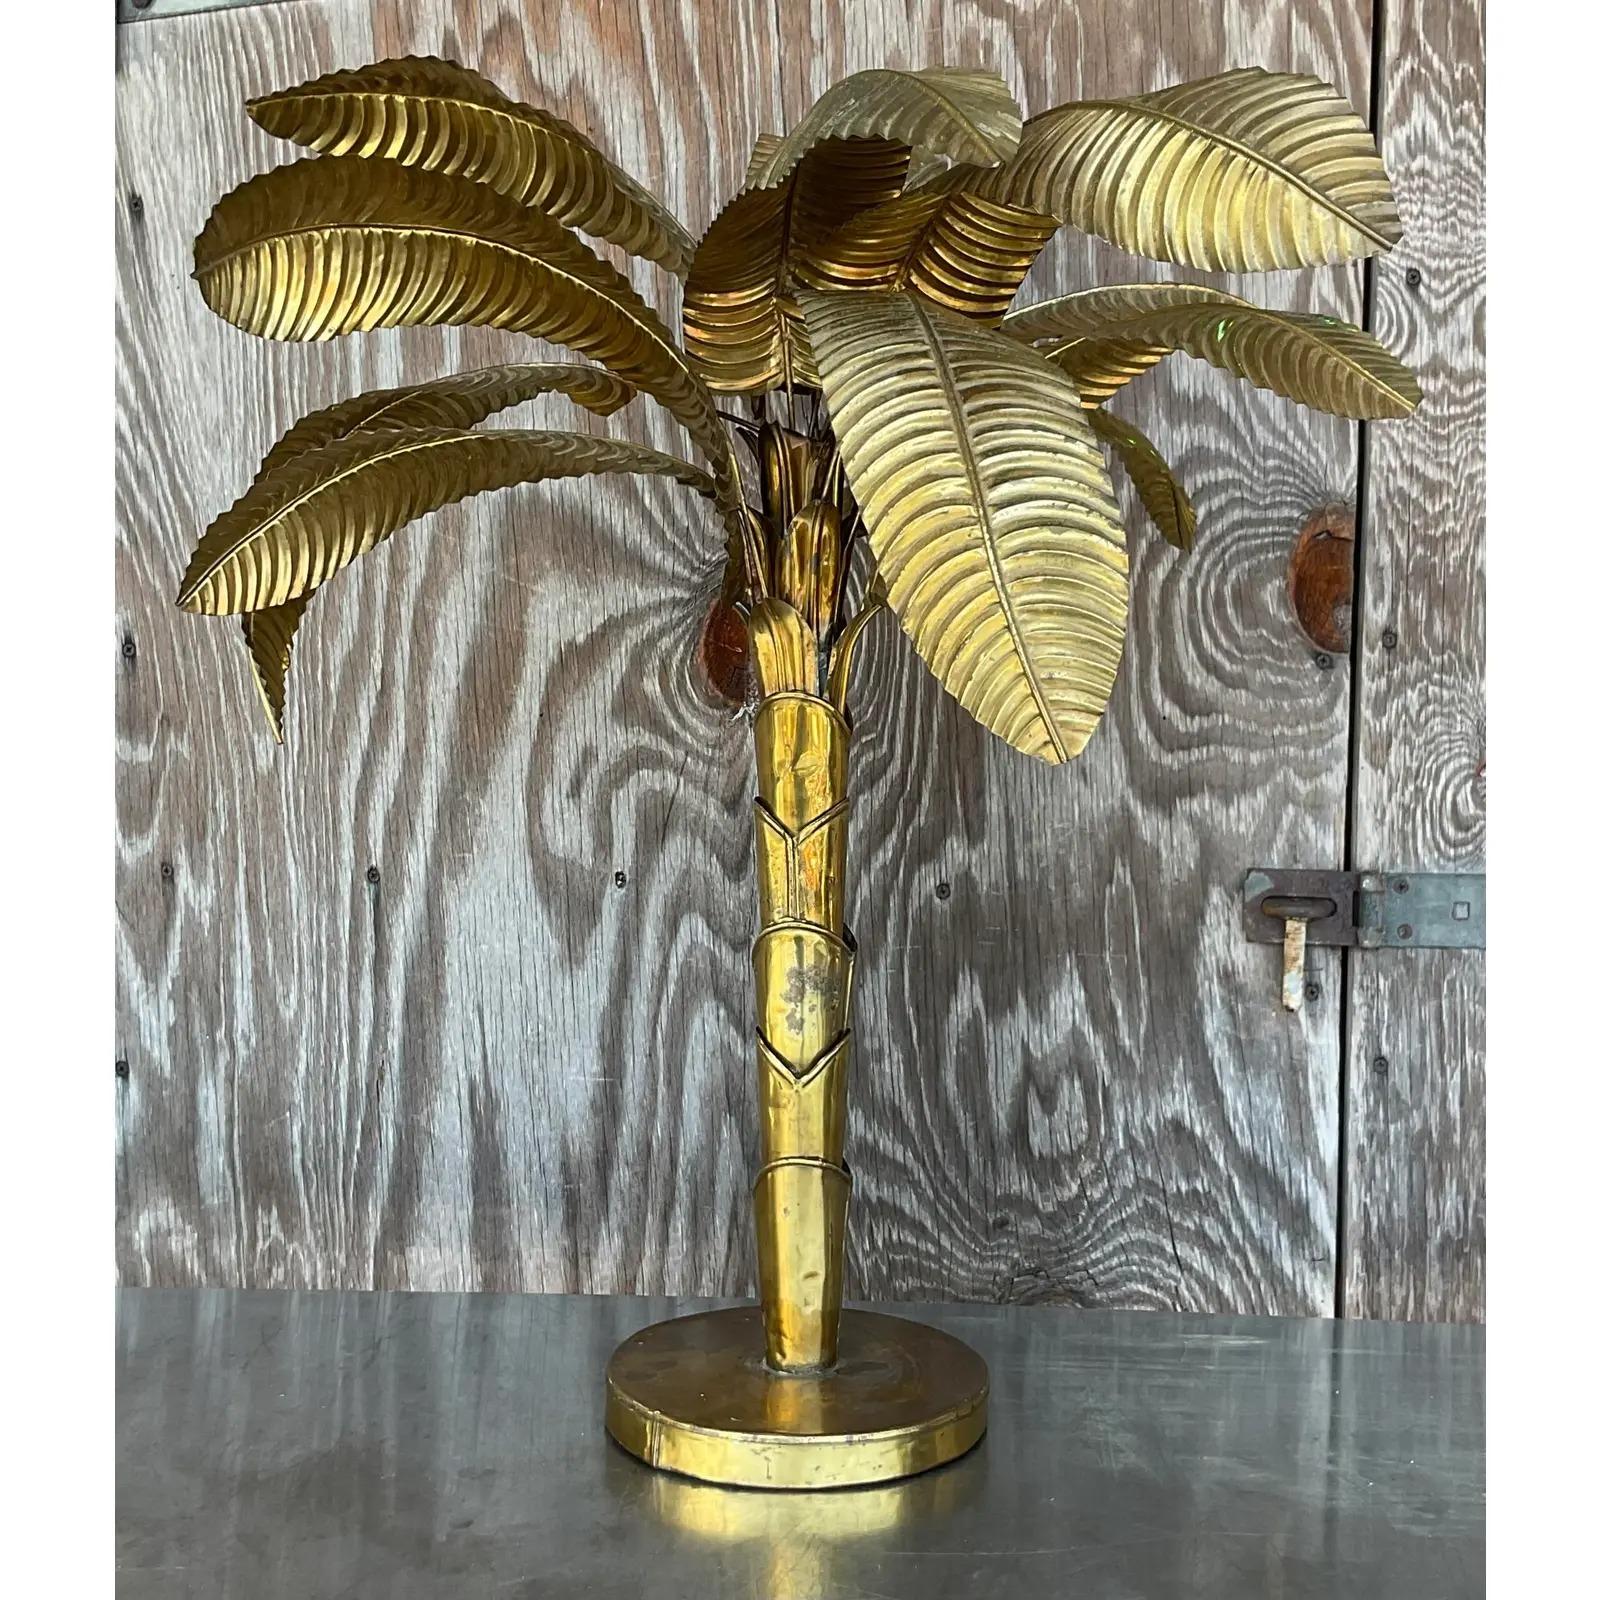 A stunning vintage Brass table top palm tree. Imported from Paris by the Maison Jansen group. A great way to add a flash of glamour to any space. Put it on a pedestal for extra height. Acquired from a Palm Beach estate.